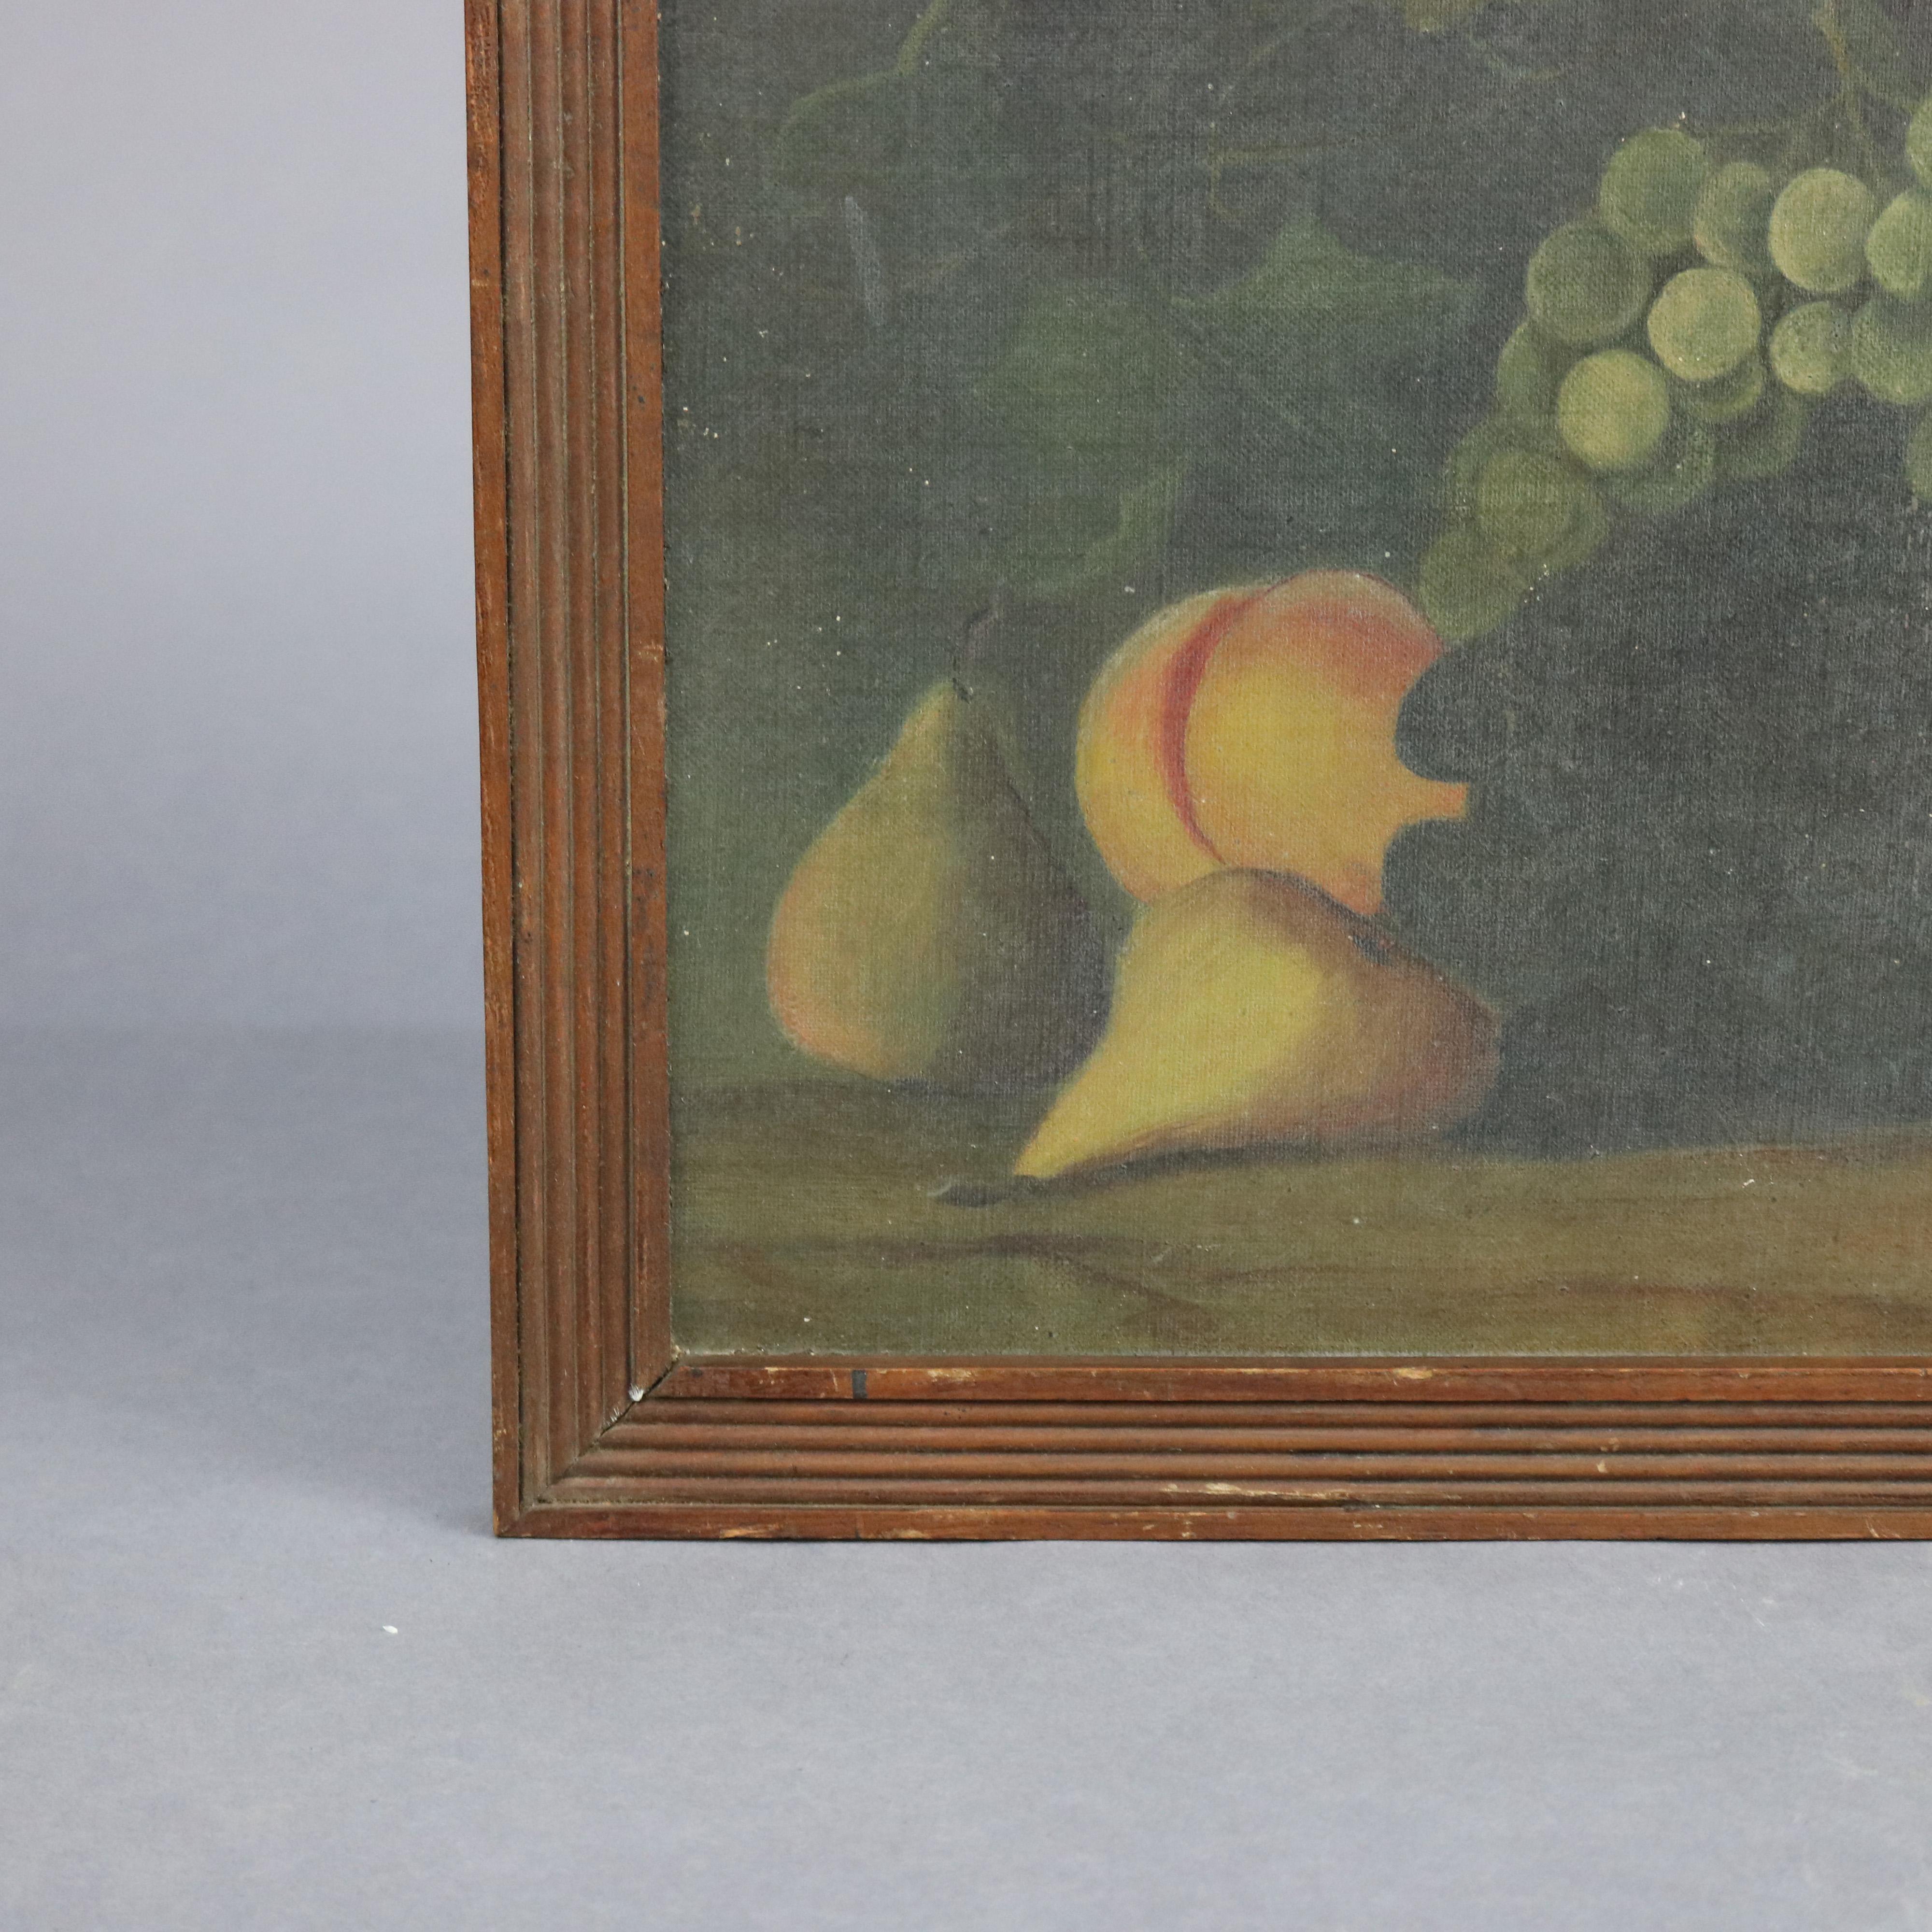 Metal Antique Roesen School Fruit Still Life Oil Painting on Canvas, 19th Century